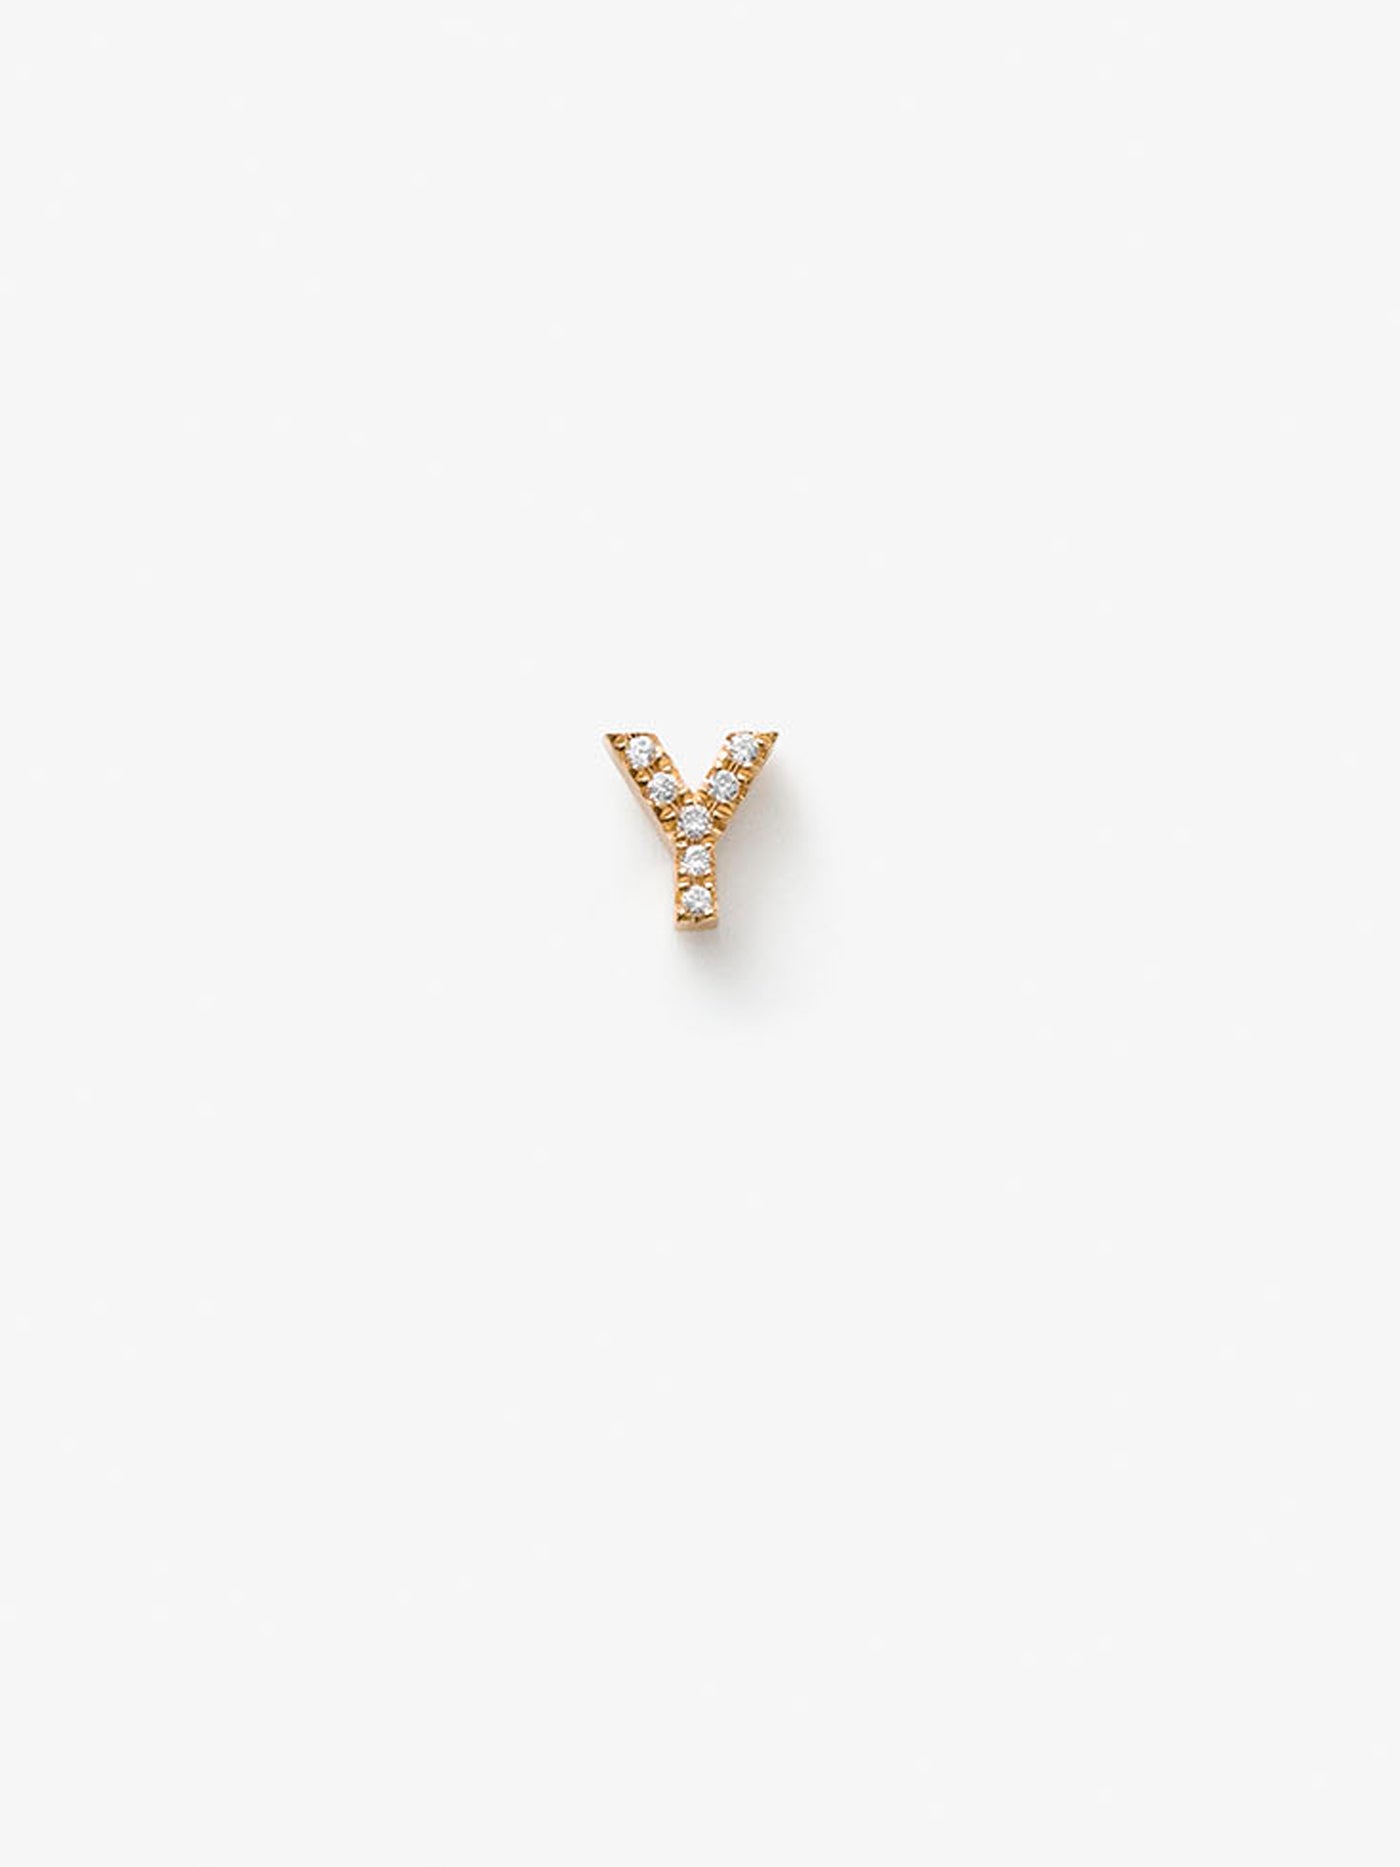 Letter Y in Diamonds and 18k Gold